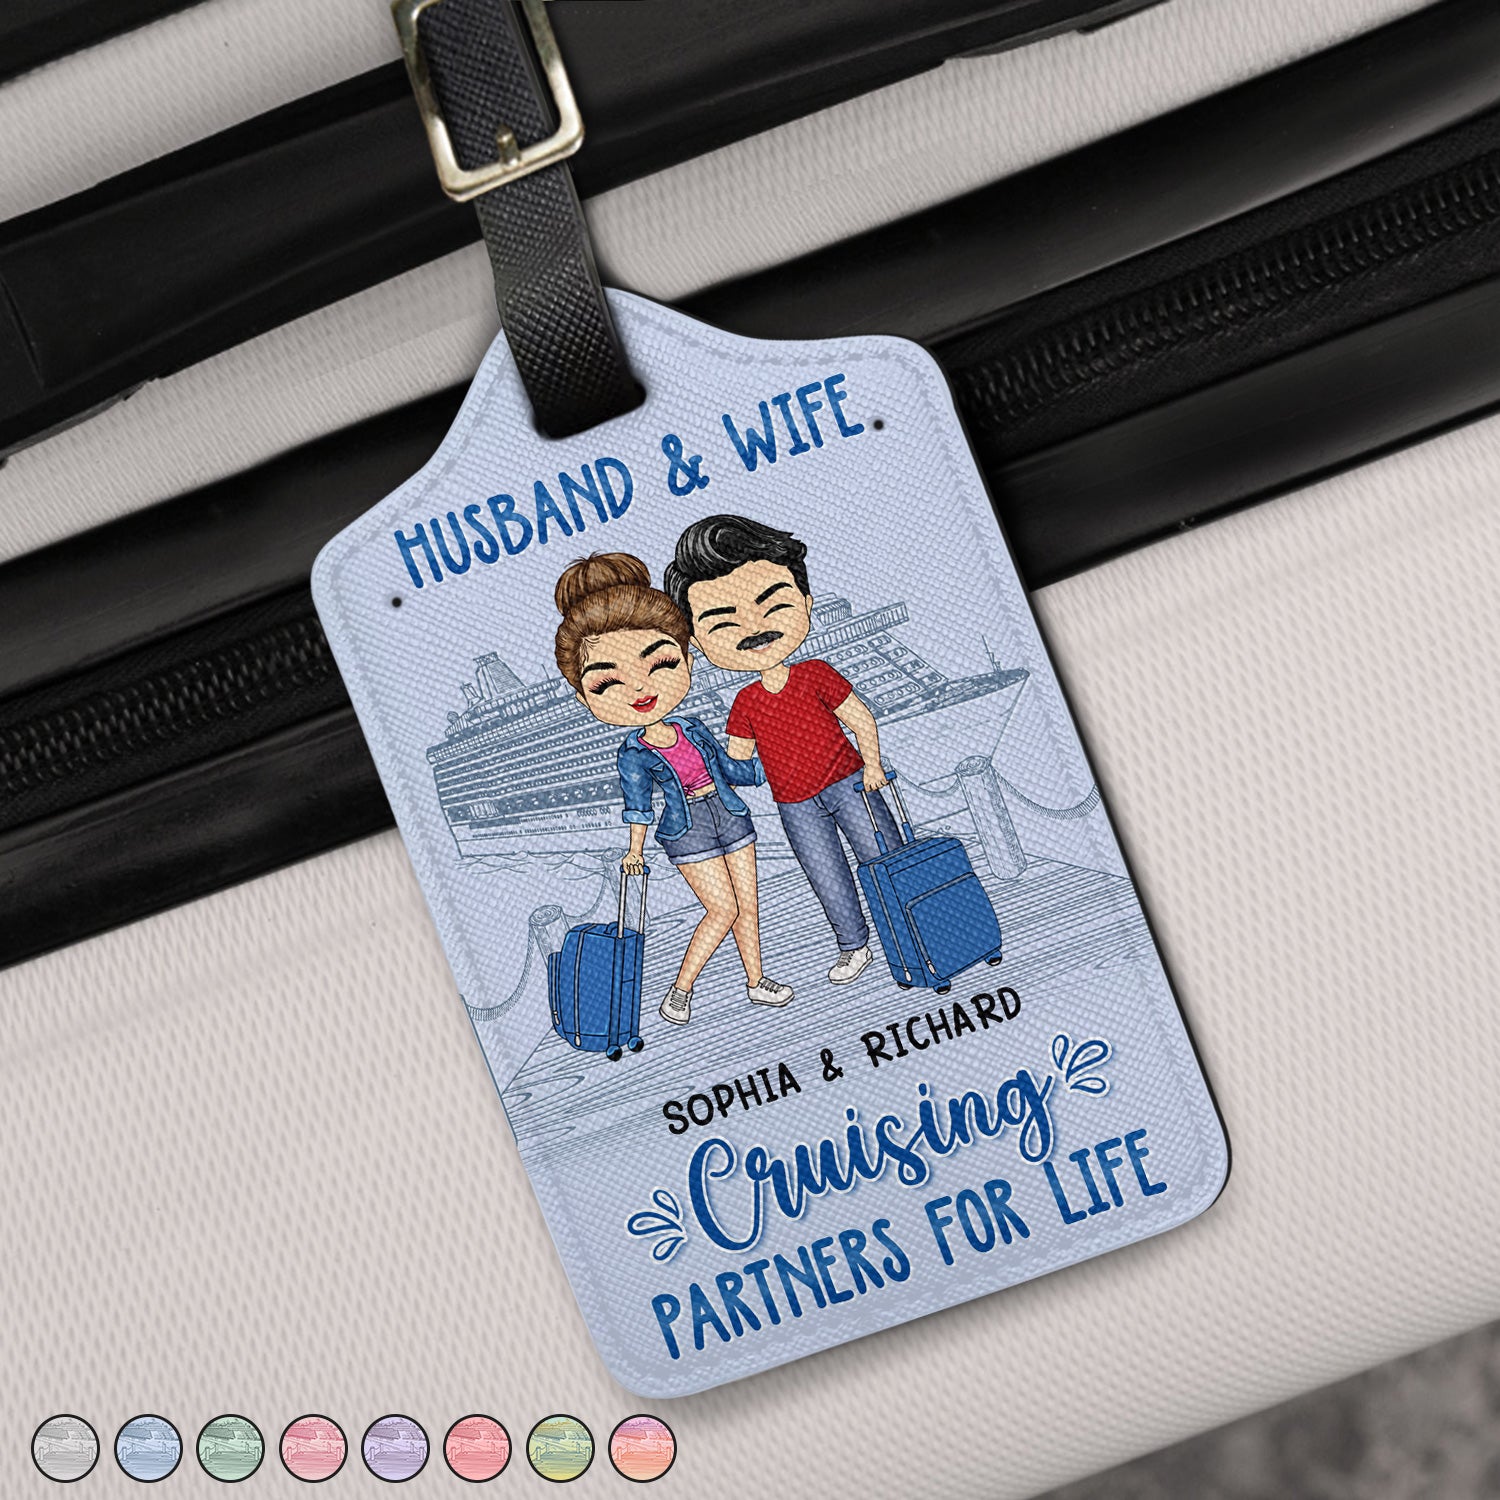 Husband & Wife Cruising Partners For Life - Gift For Couples - Personalized Luggage Tag